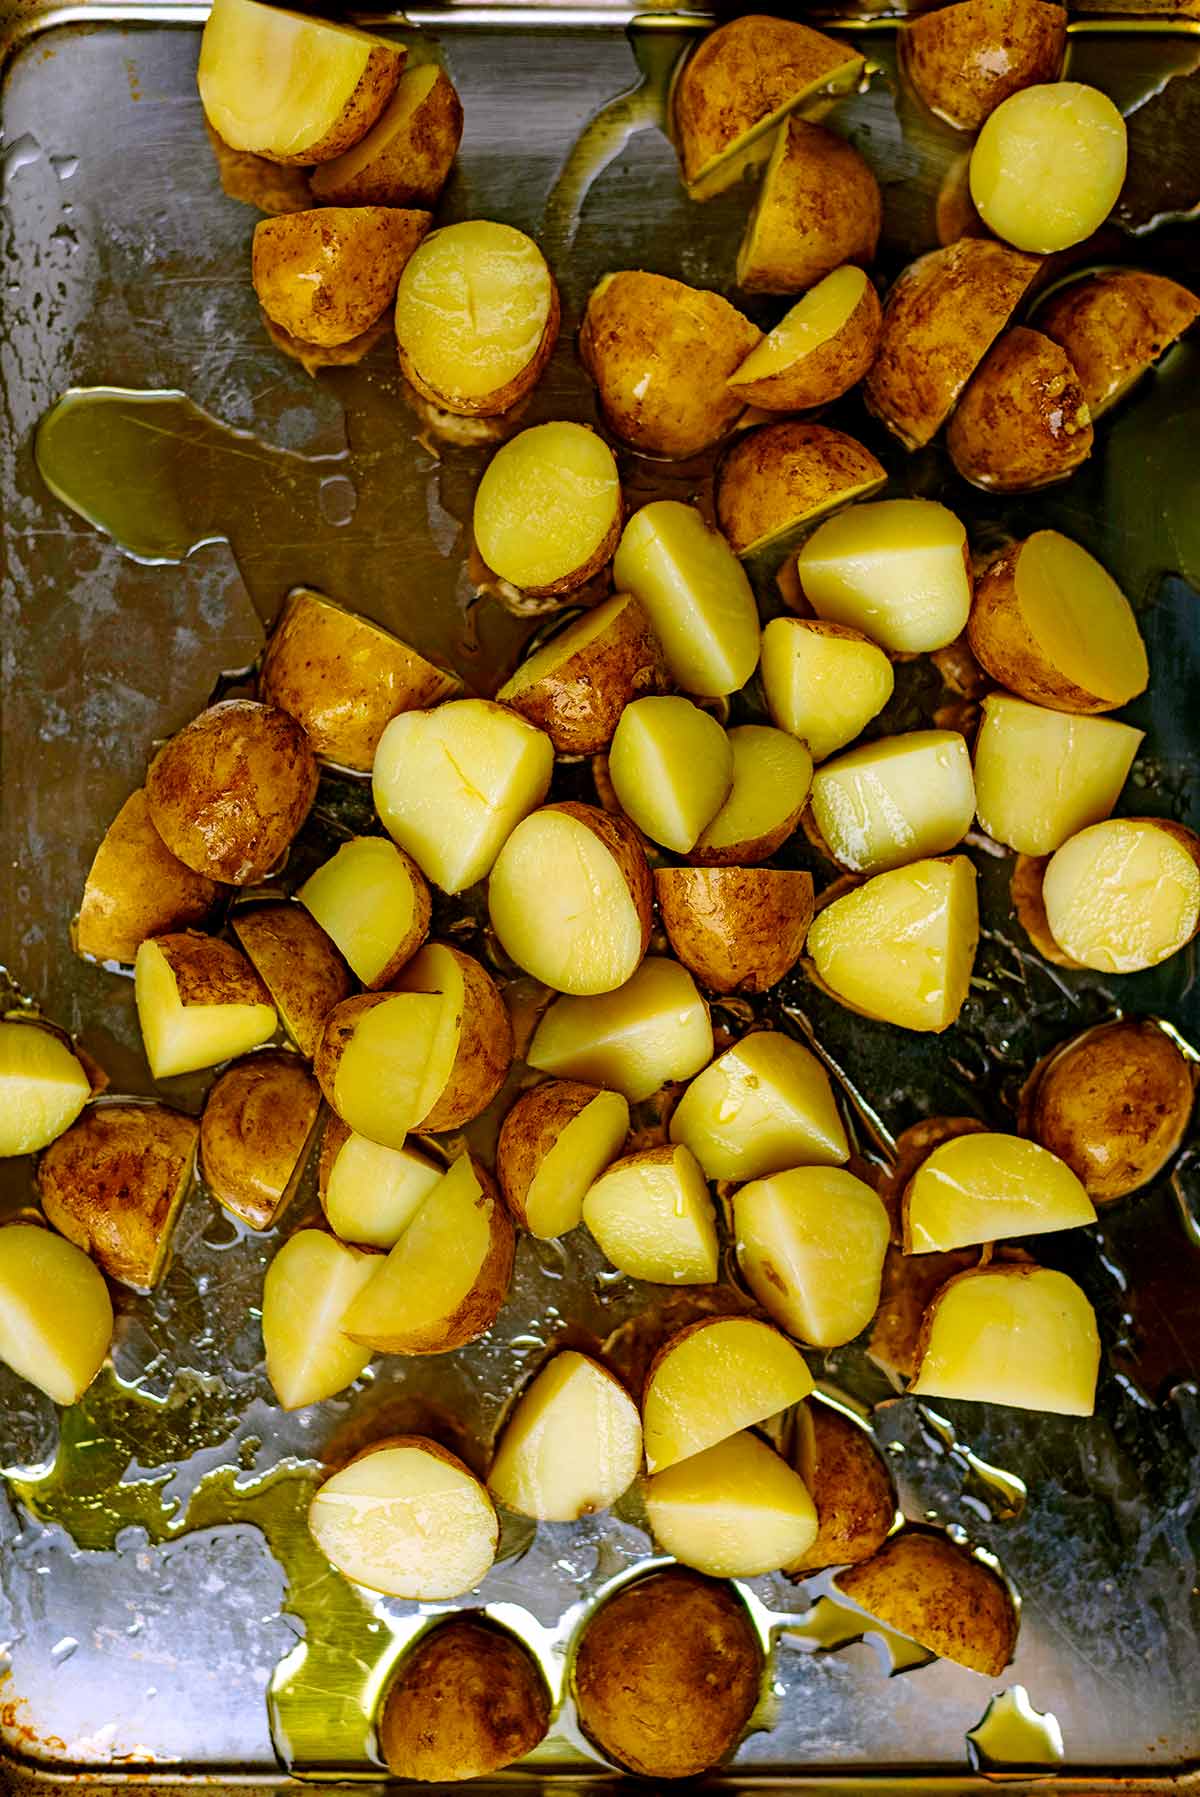 A baking tray full of new potatoes cut in half covered in oil.